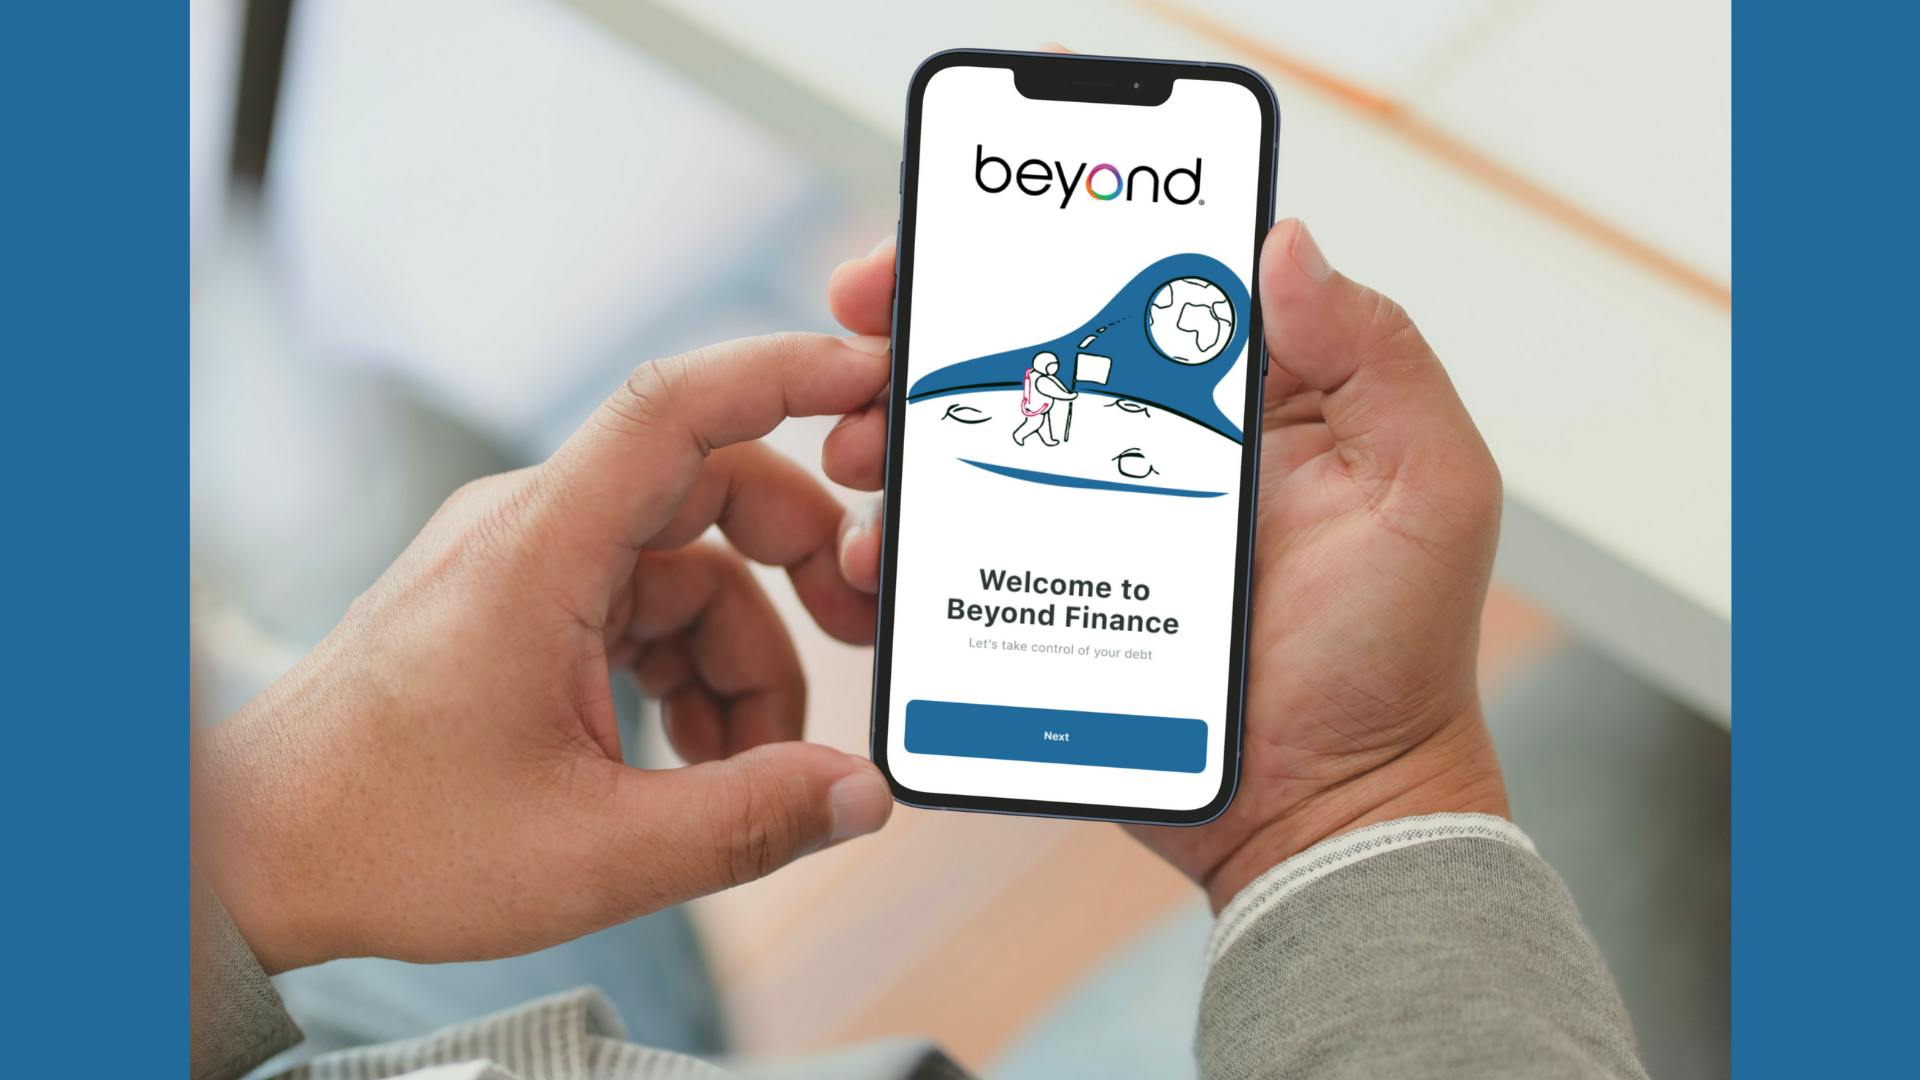 An image showing the welcome screen to Beyond Finance's mobile app